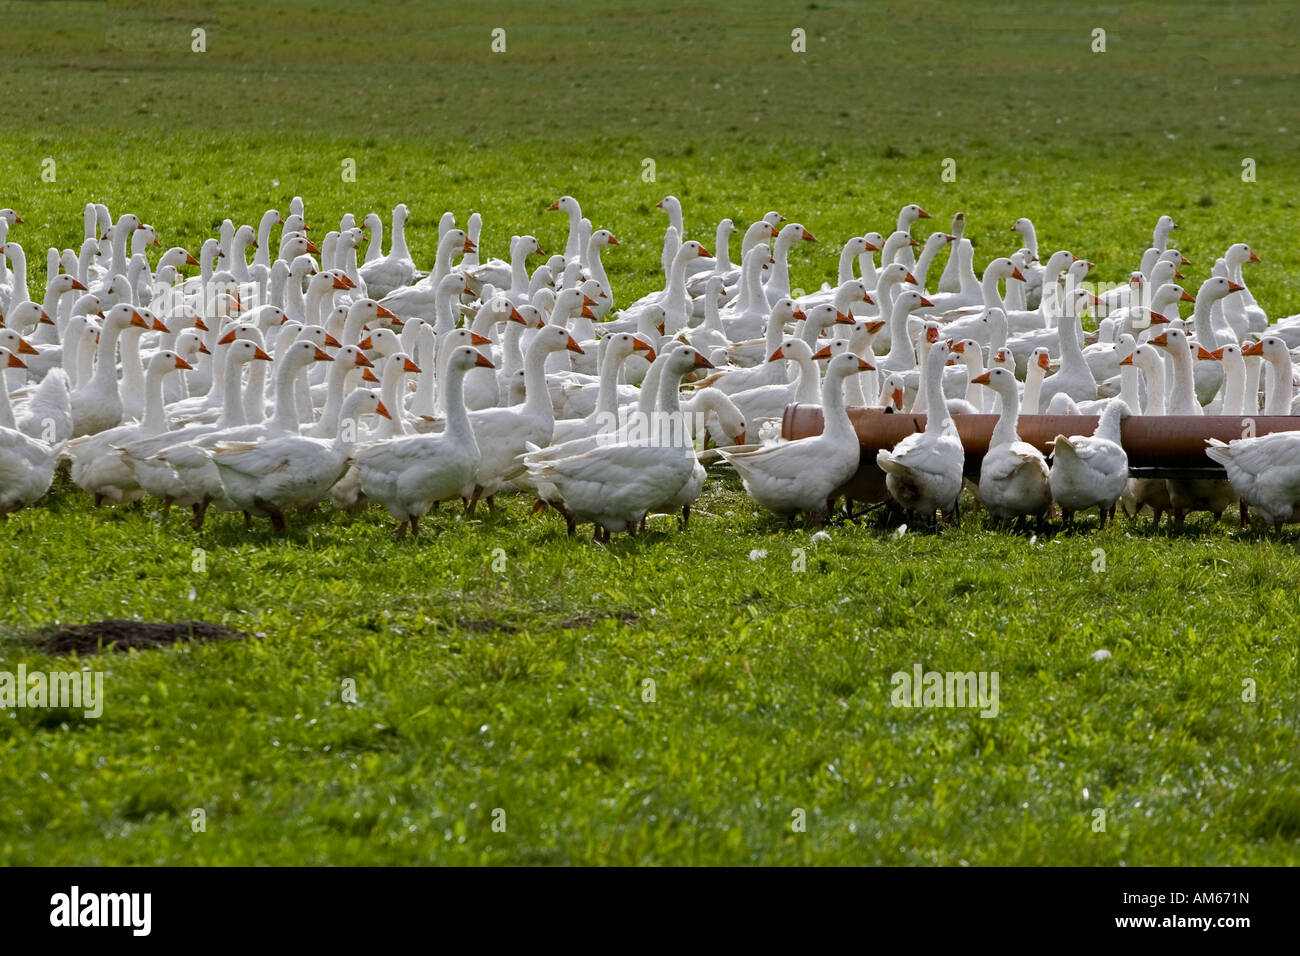 Group of geese Stock Photo